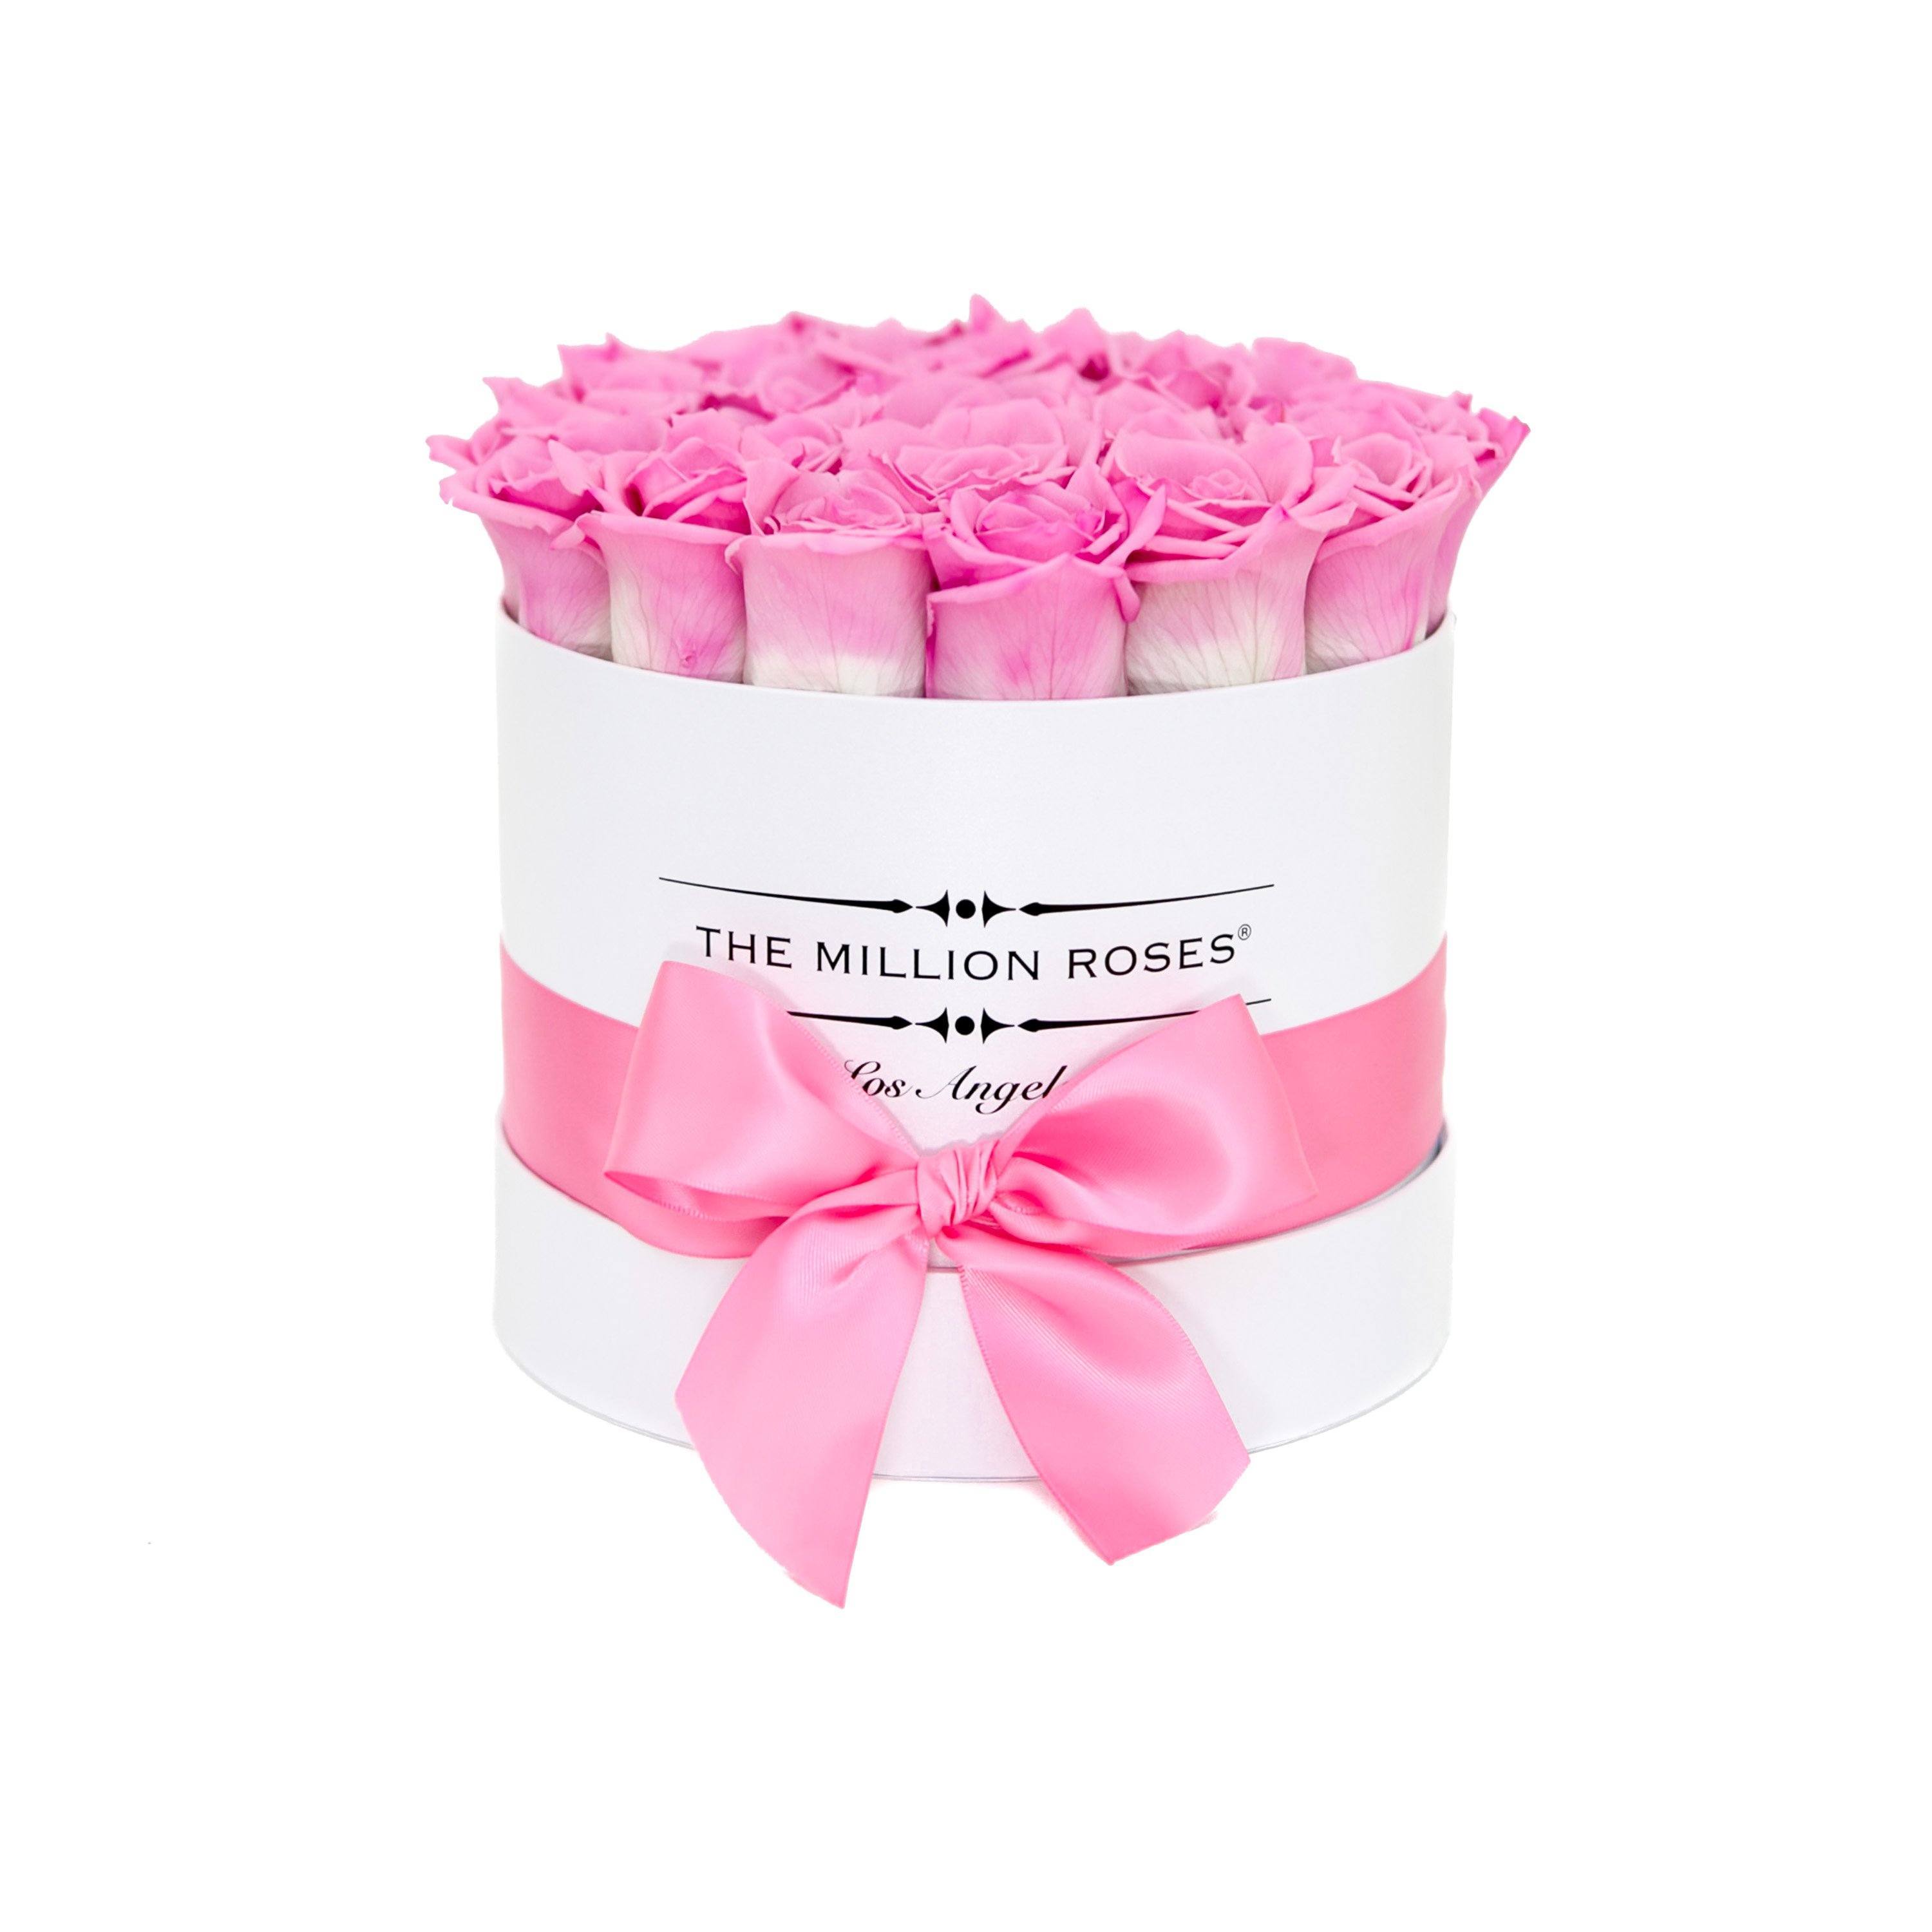 classic round box - white - pink-candy roses pink eternity roses - the million roses